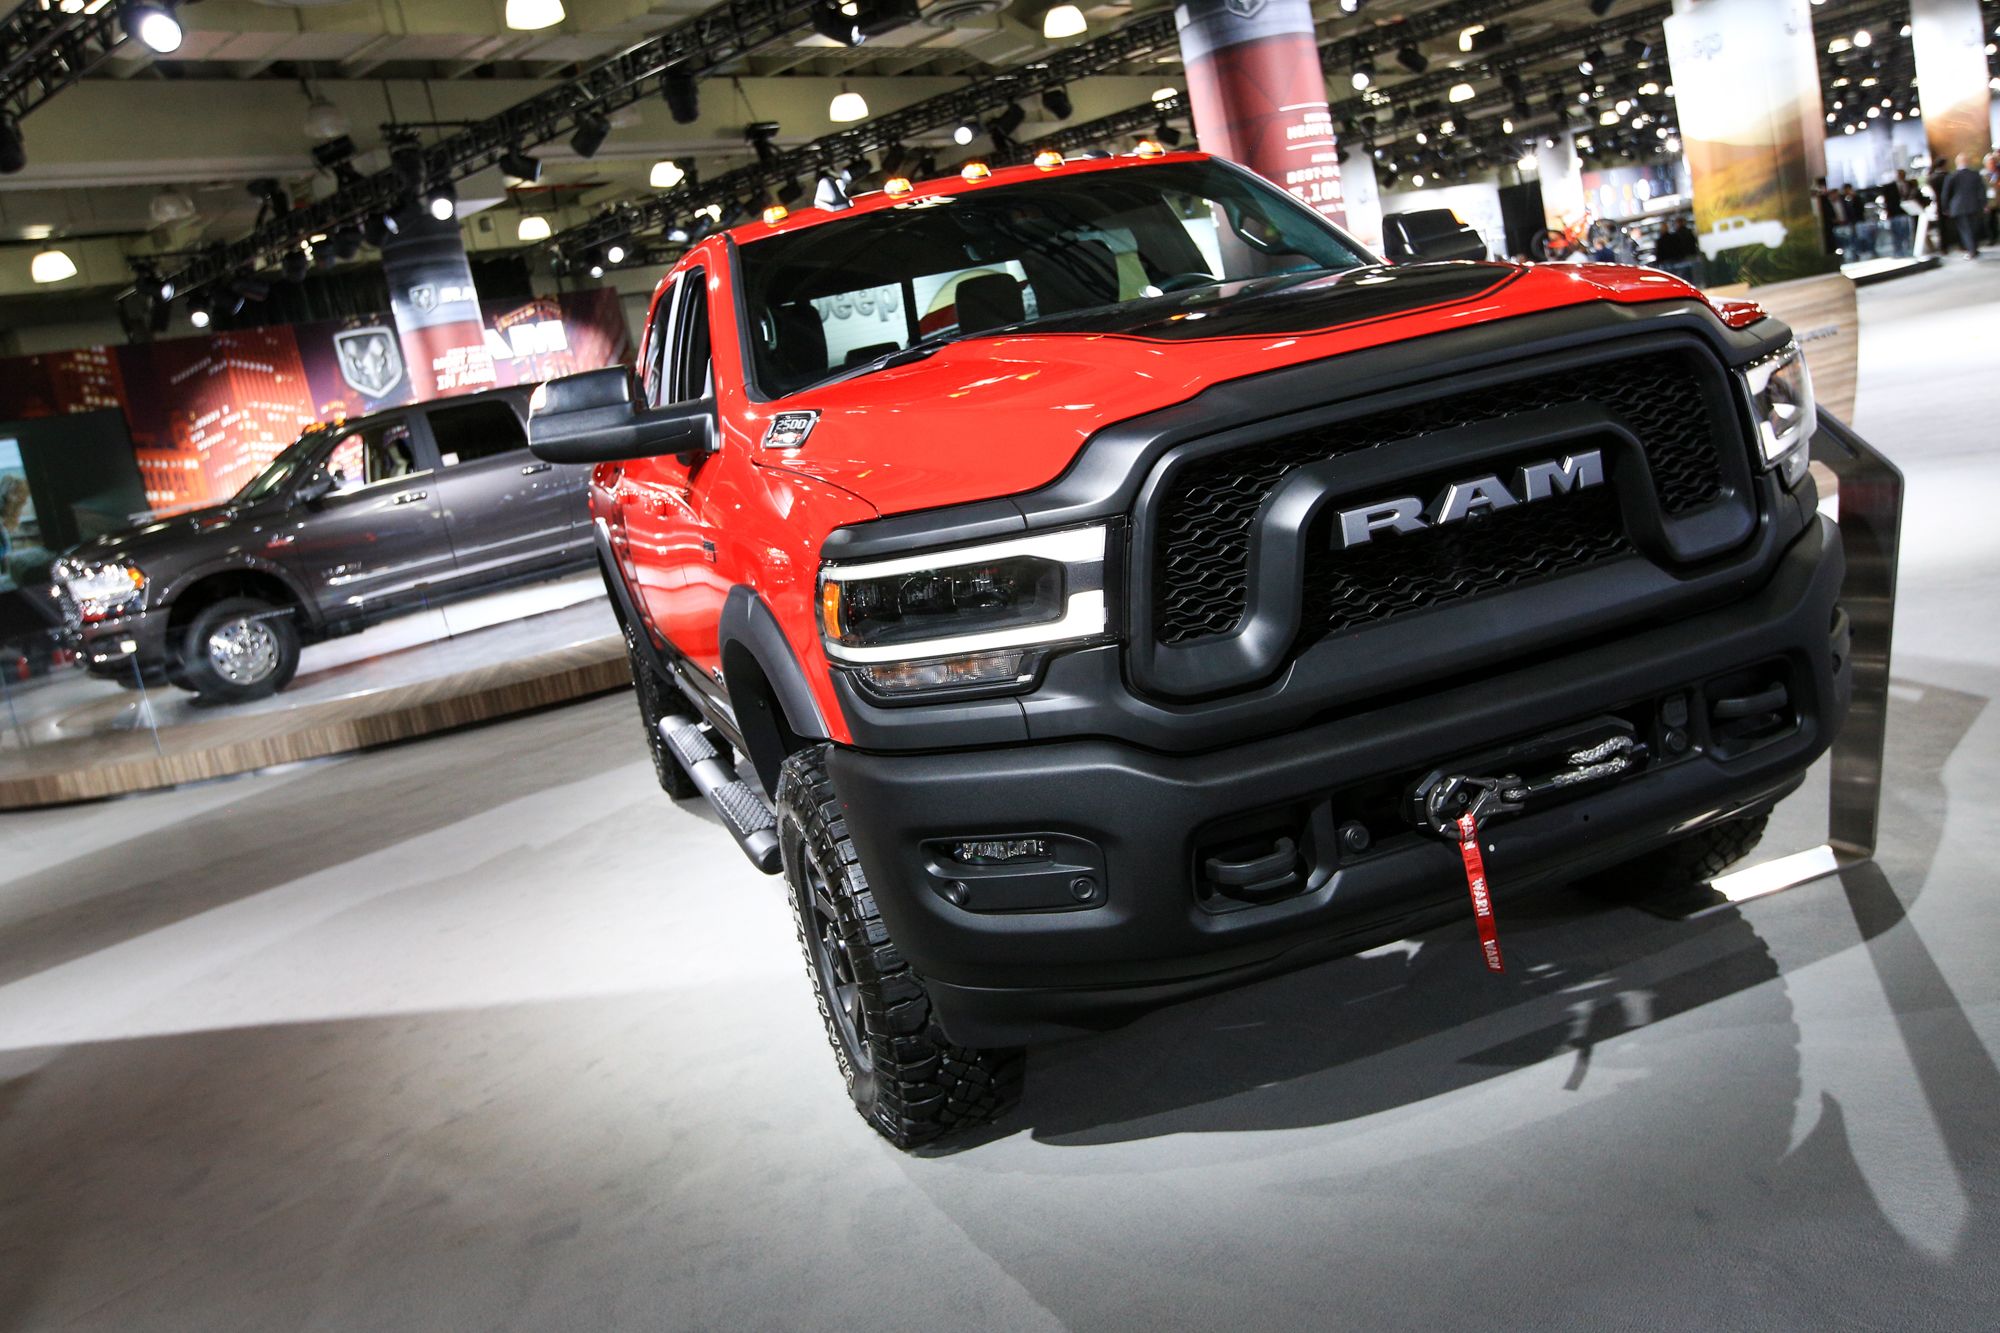 Ram pickups outsell rival Chevy Silverado for second-straight quarter